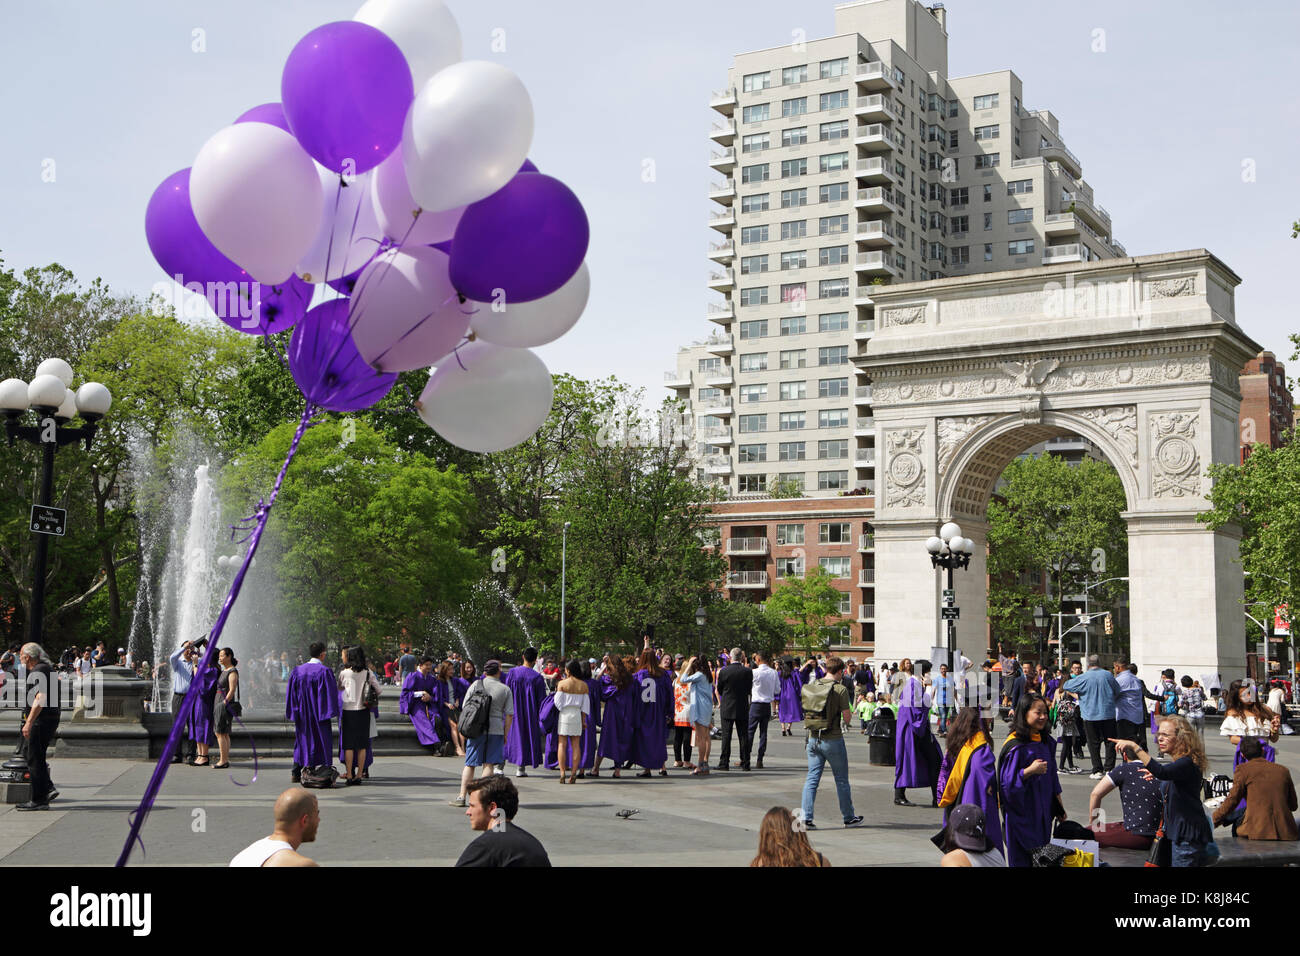 New York, NY, USA - May 16, 2017: New York University students, in caps and gowns, gather in Washington Square Park to celebrate graduation Stock Photo